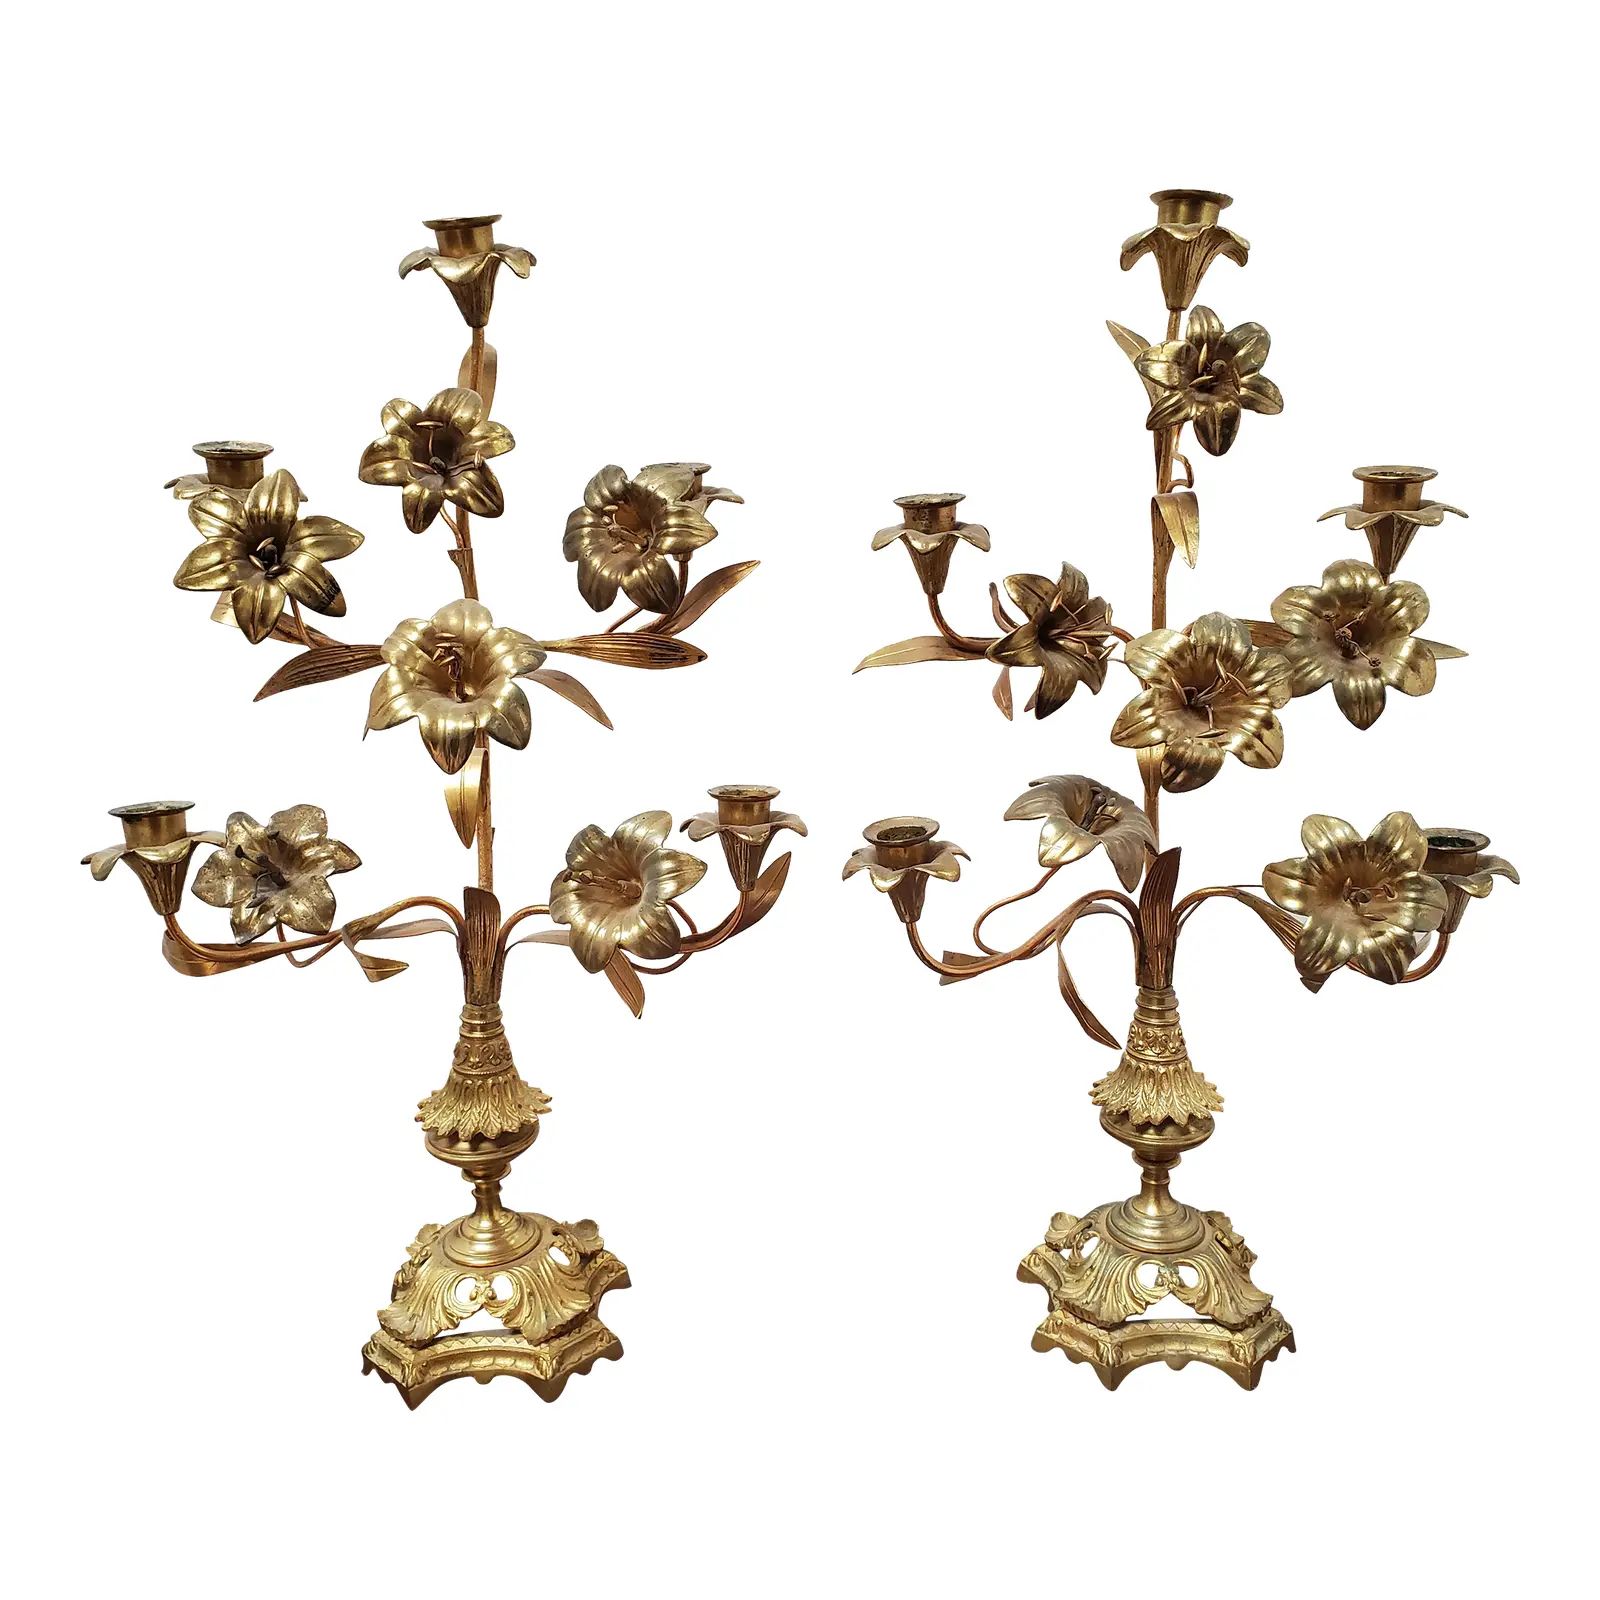 Early 20th Century French Gilt Brass Alter Lily Candelabras- a Pair | Chairish